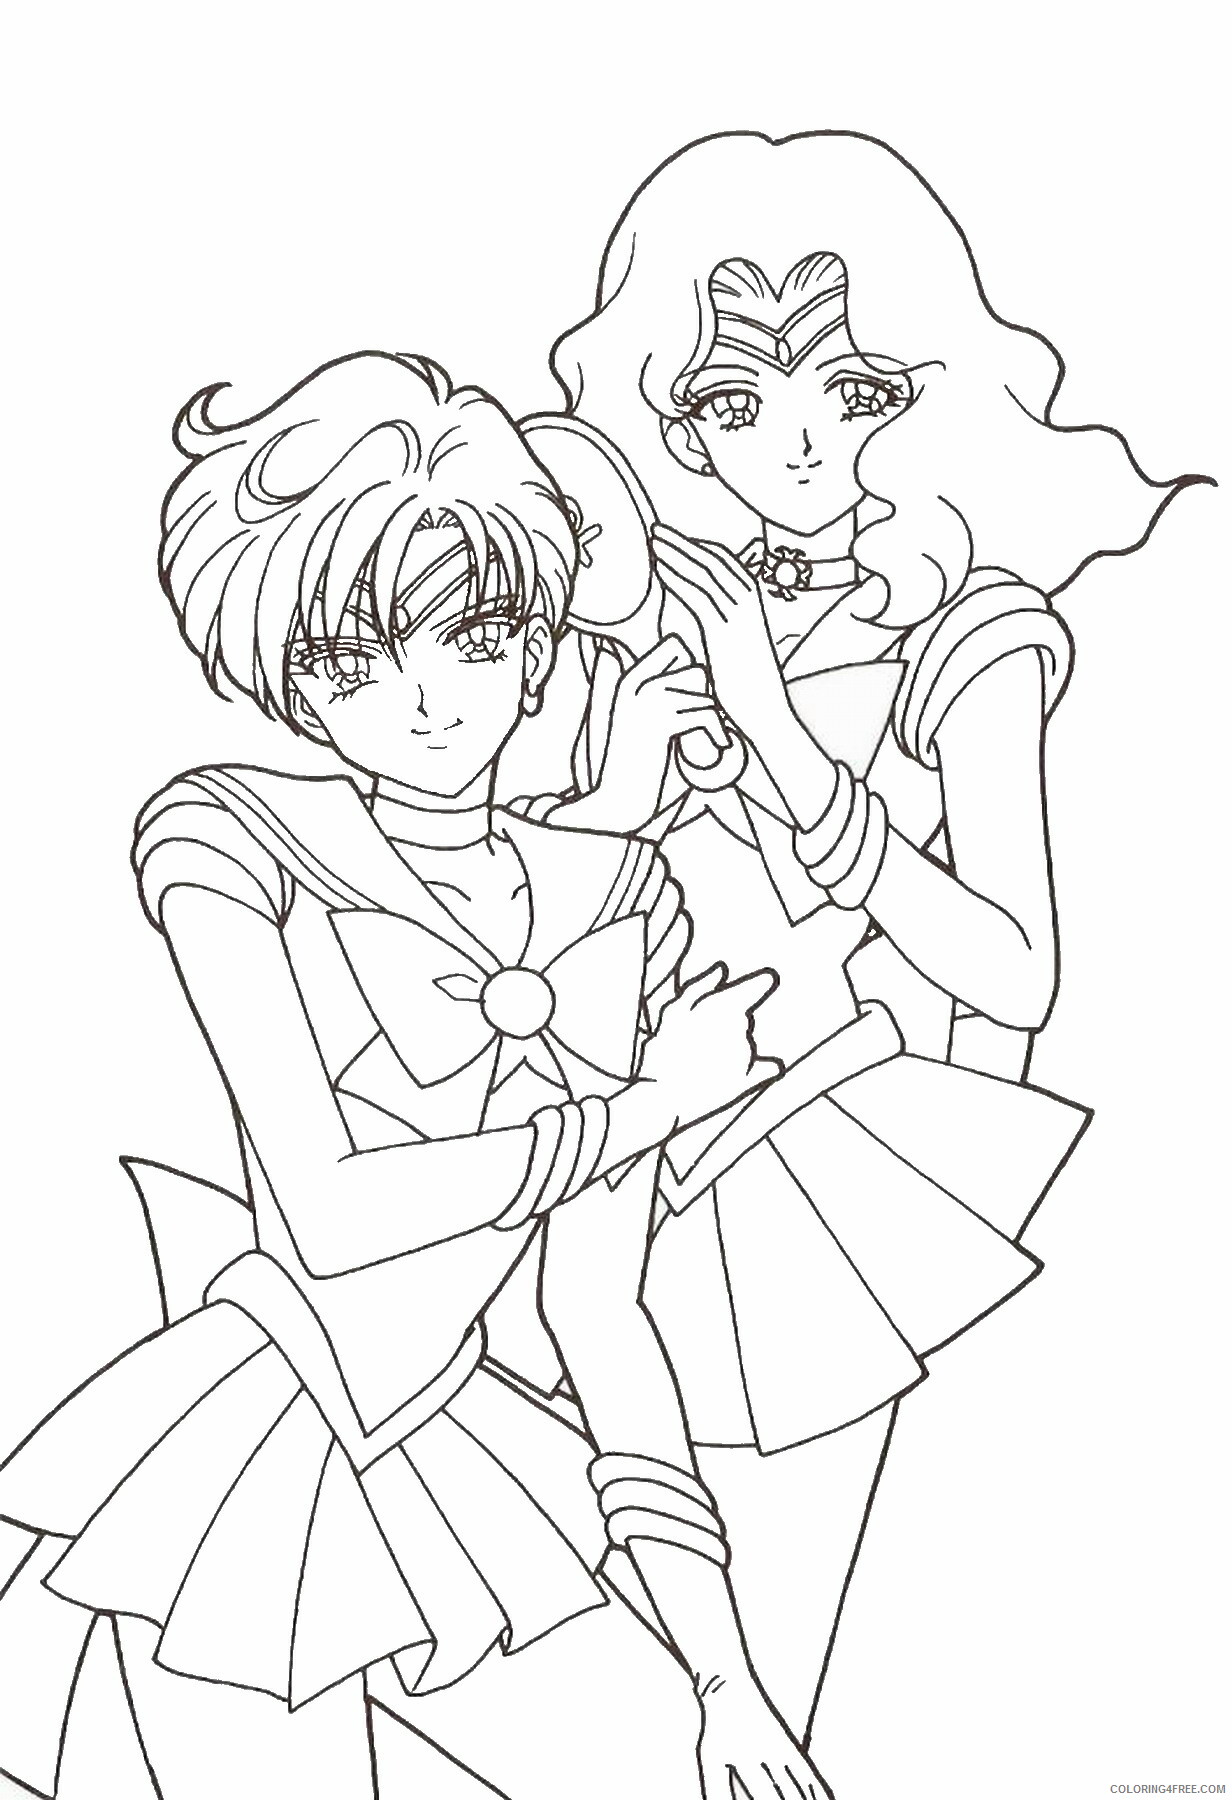 Sailor Moon Printable Coloring Pages Anime sailor_moon_cl23 2021 0974 Coloring4free